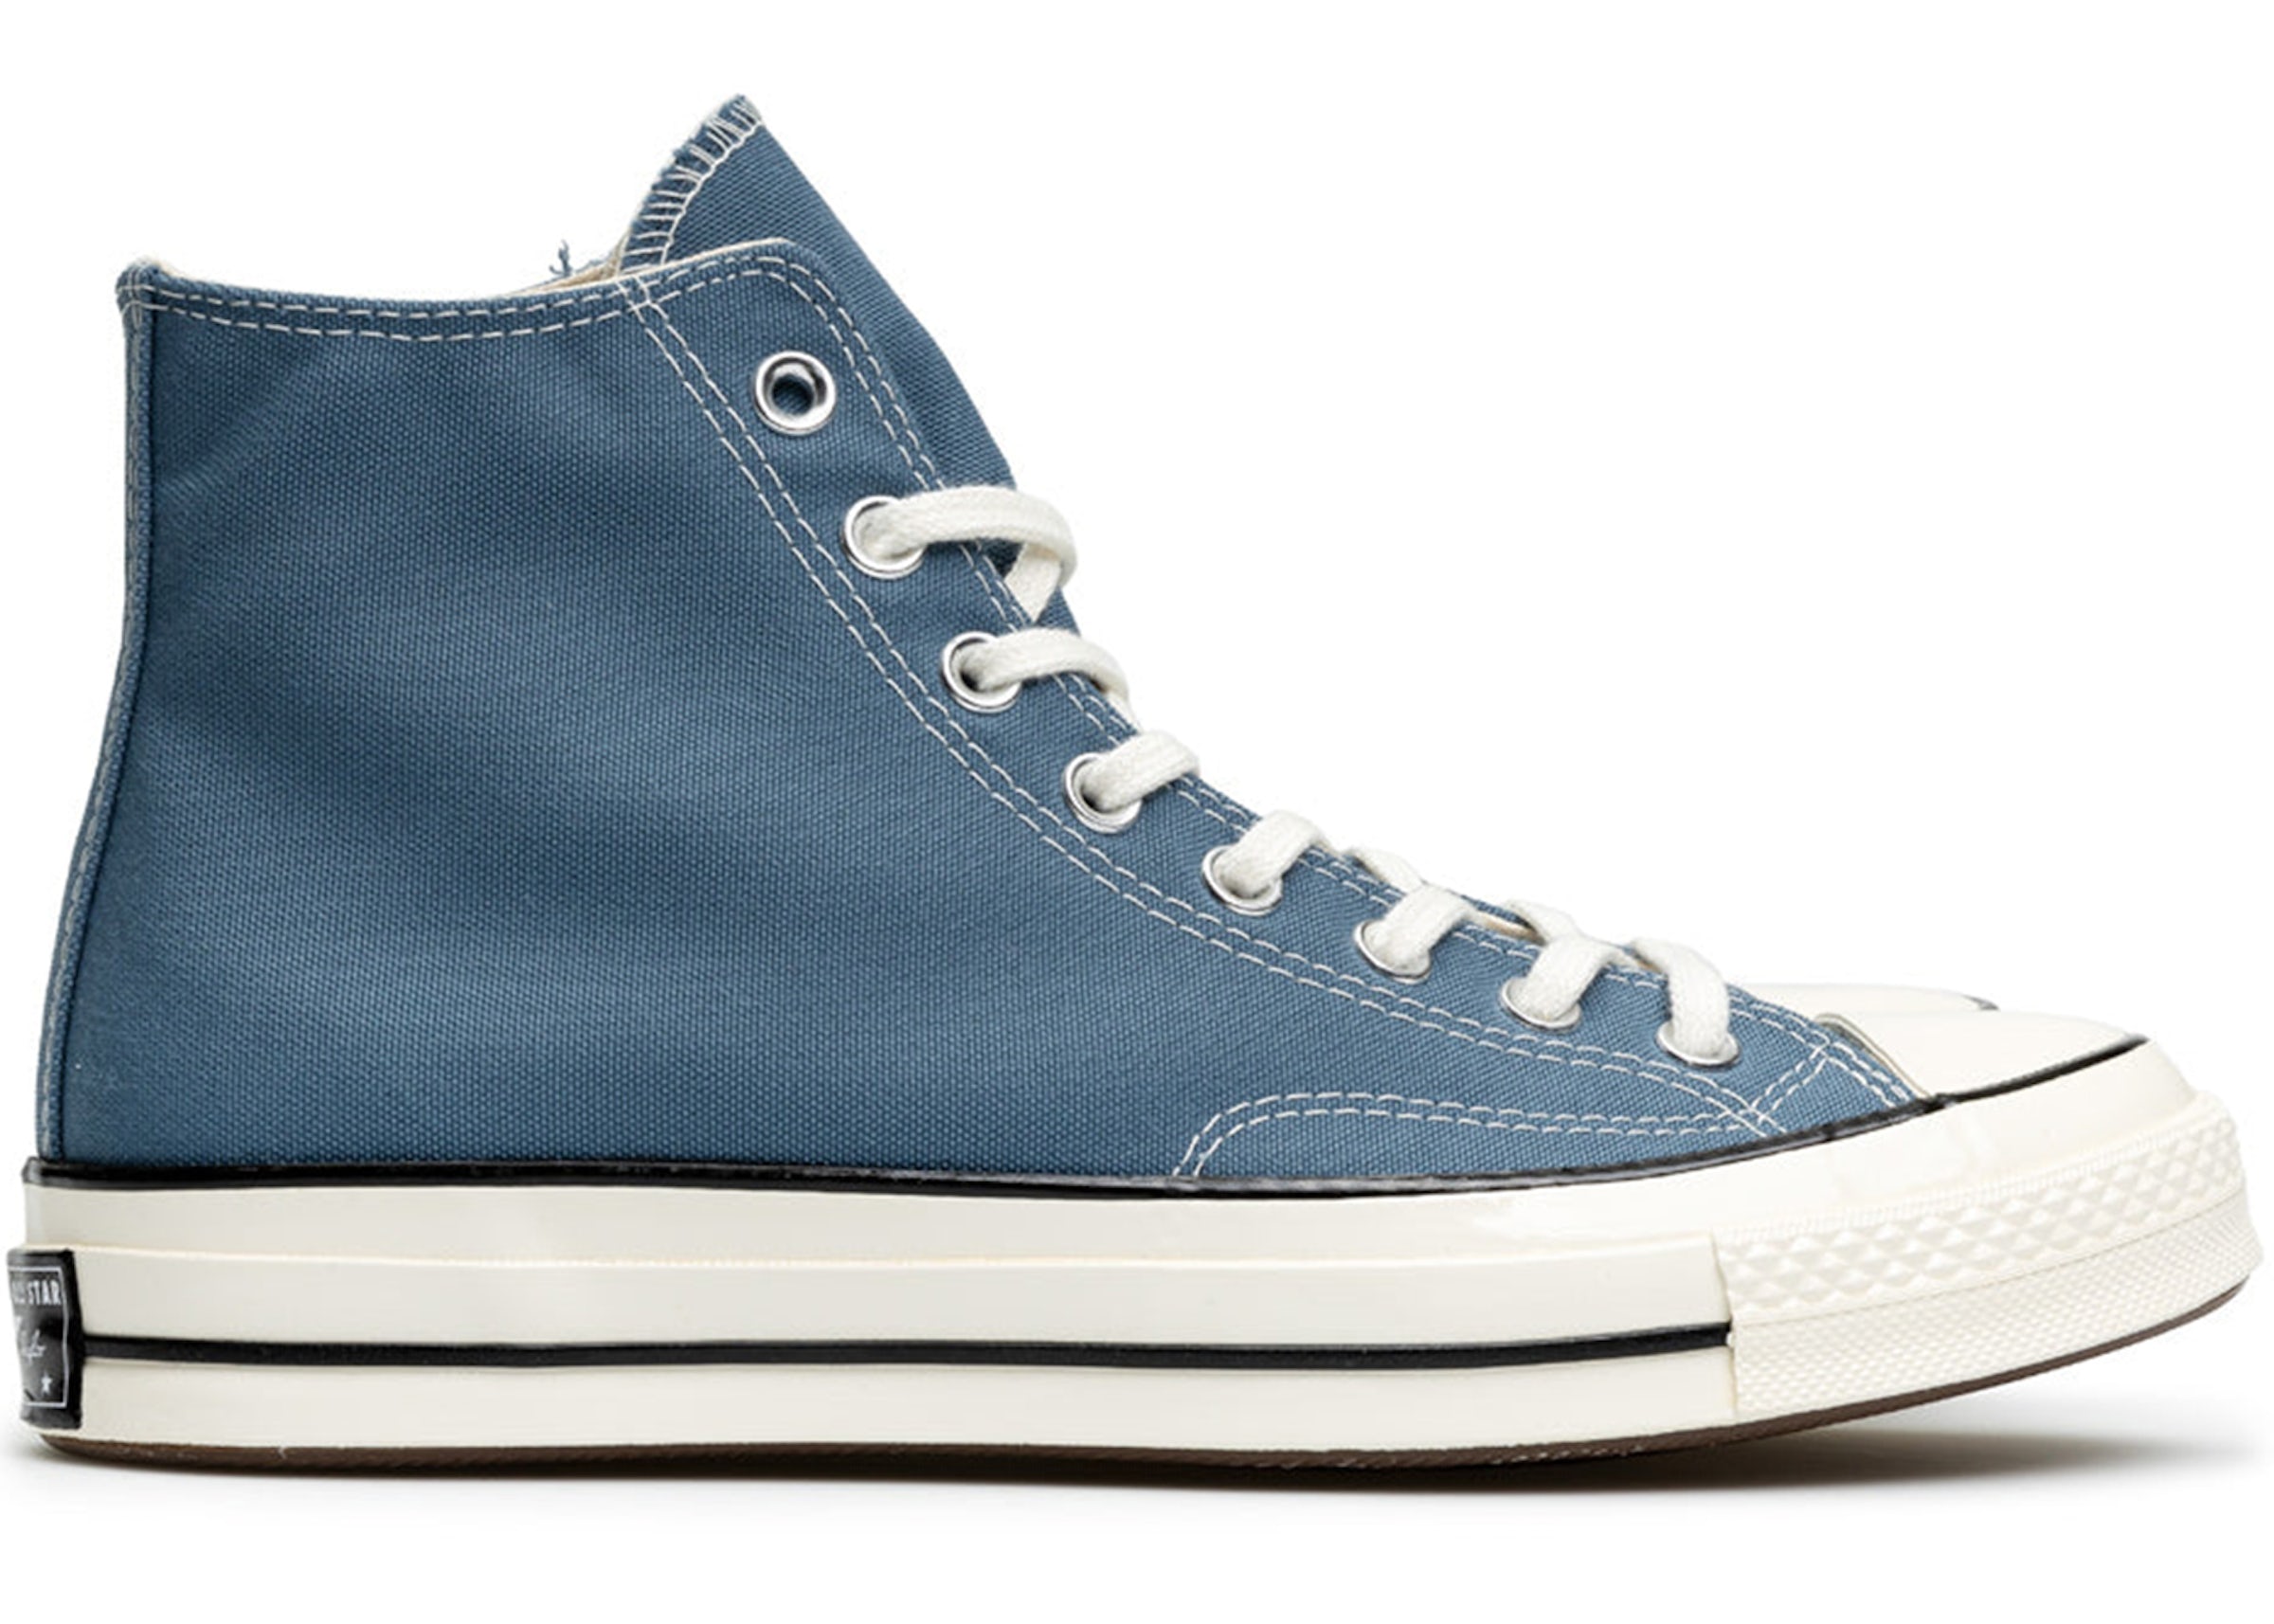 Converse Chuck Taylor All-Star 70 Vintage Waters Blue - A00752C - US